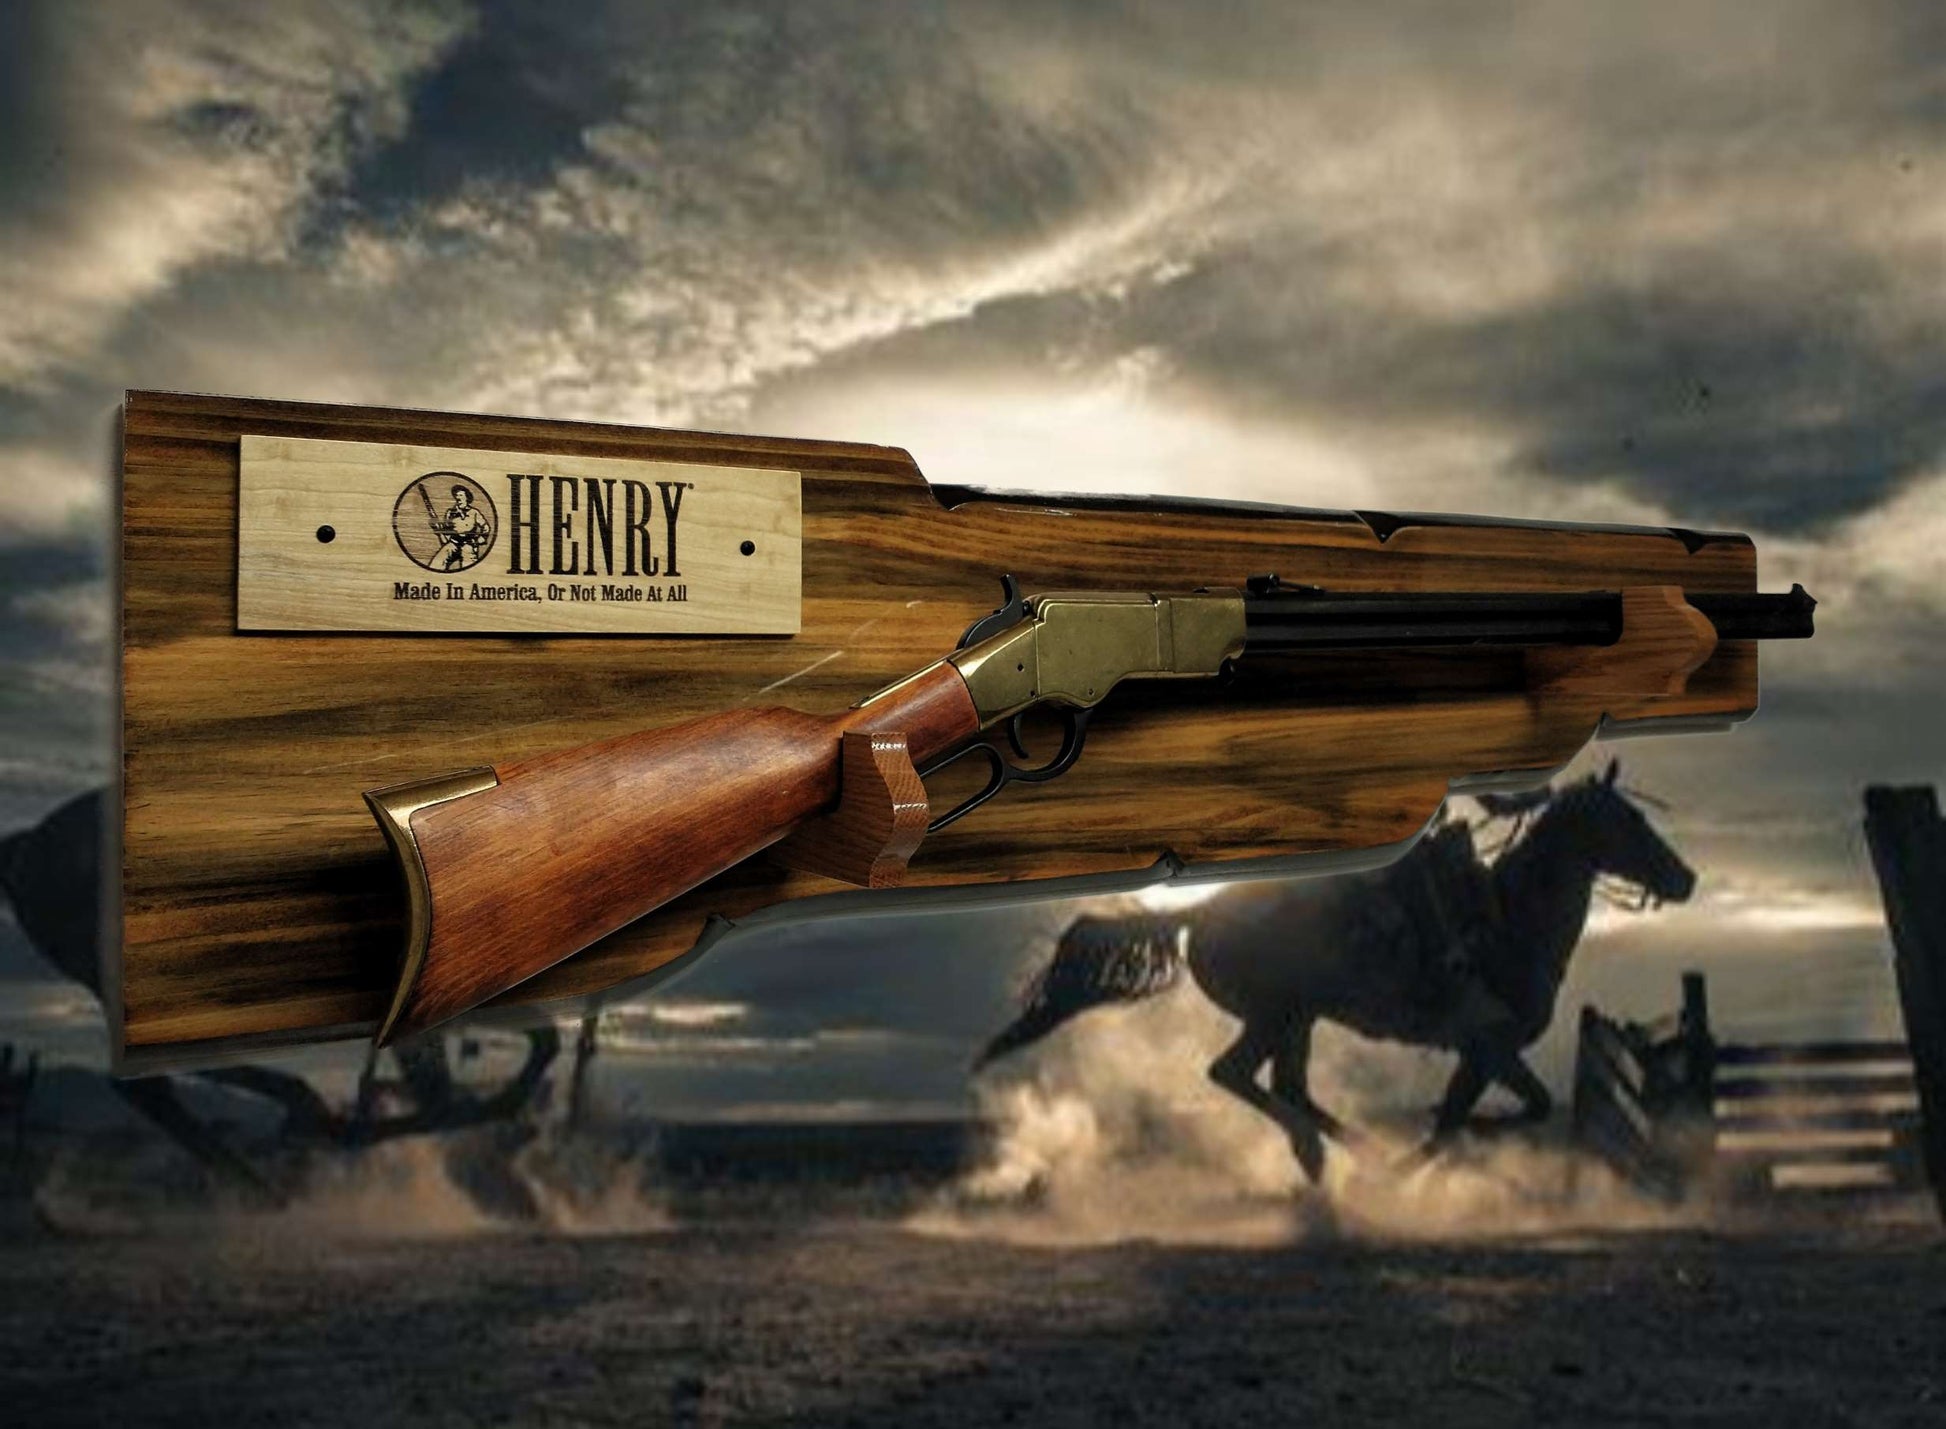 Walker Wood Gifts Rustic Henry Display For Lever Action Rifle Knotty Pine Faux Live Edge Cabin Décor Collectors Gift